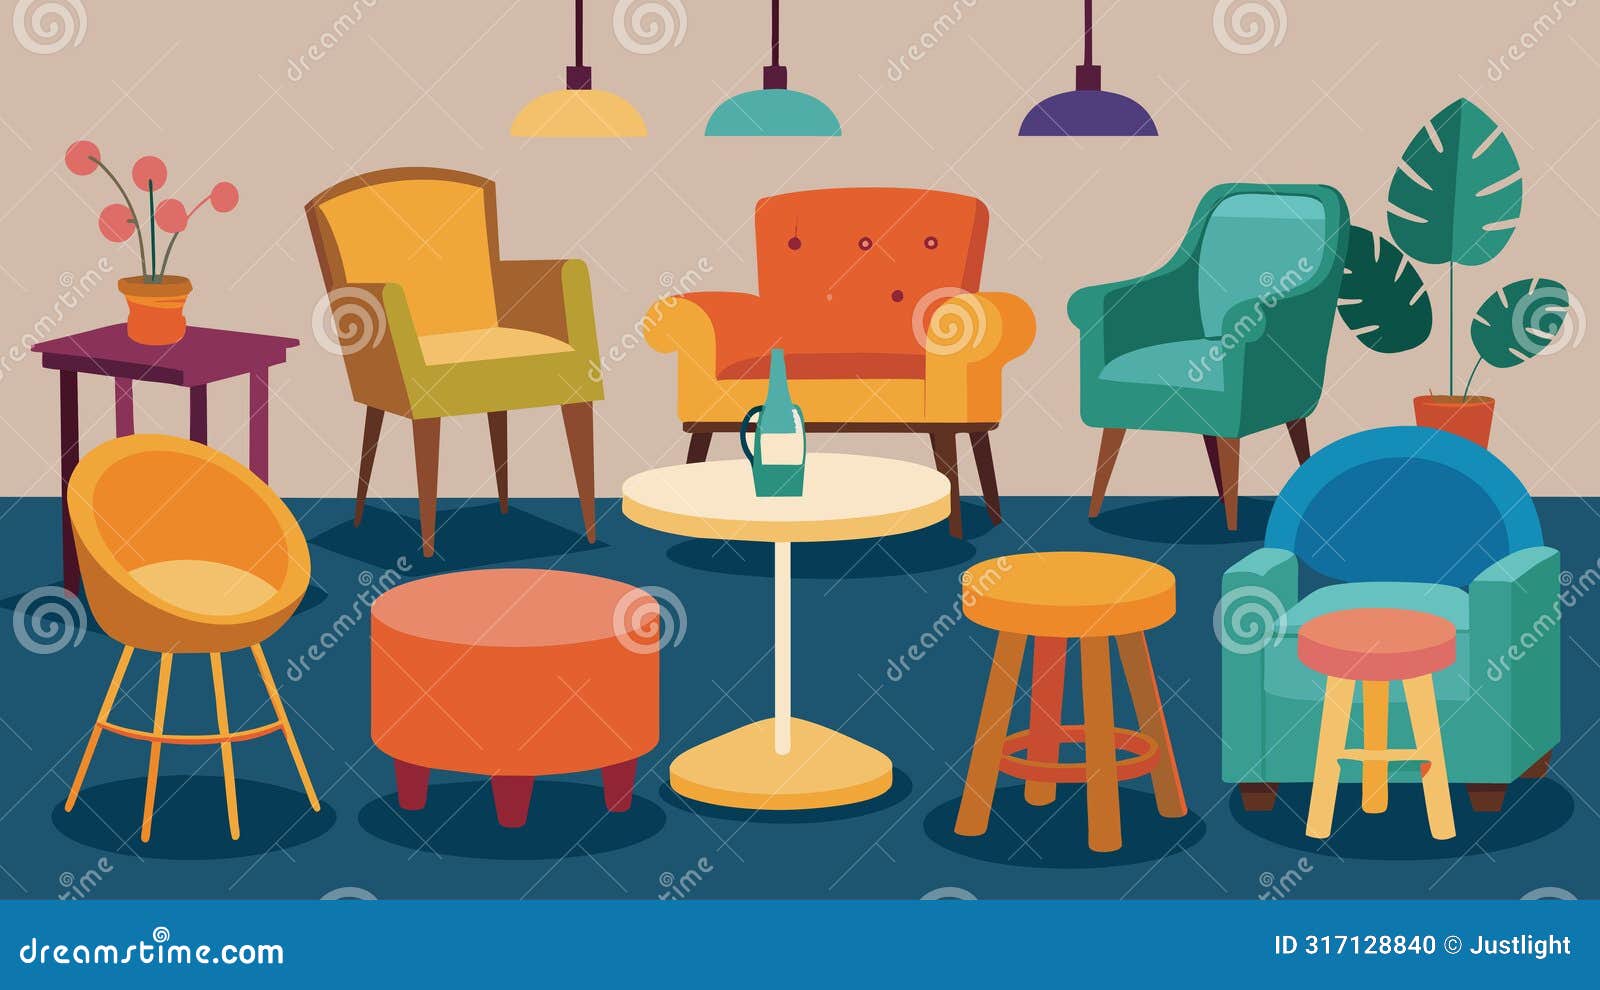 the seating options are a mix of mismatched chairs plush couches and bar stools giving the interior a bohemian feel